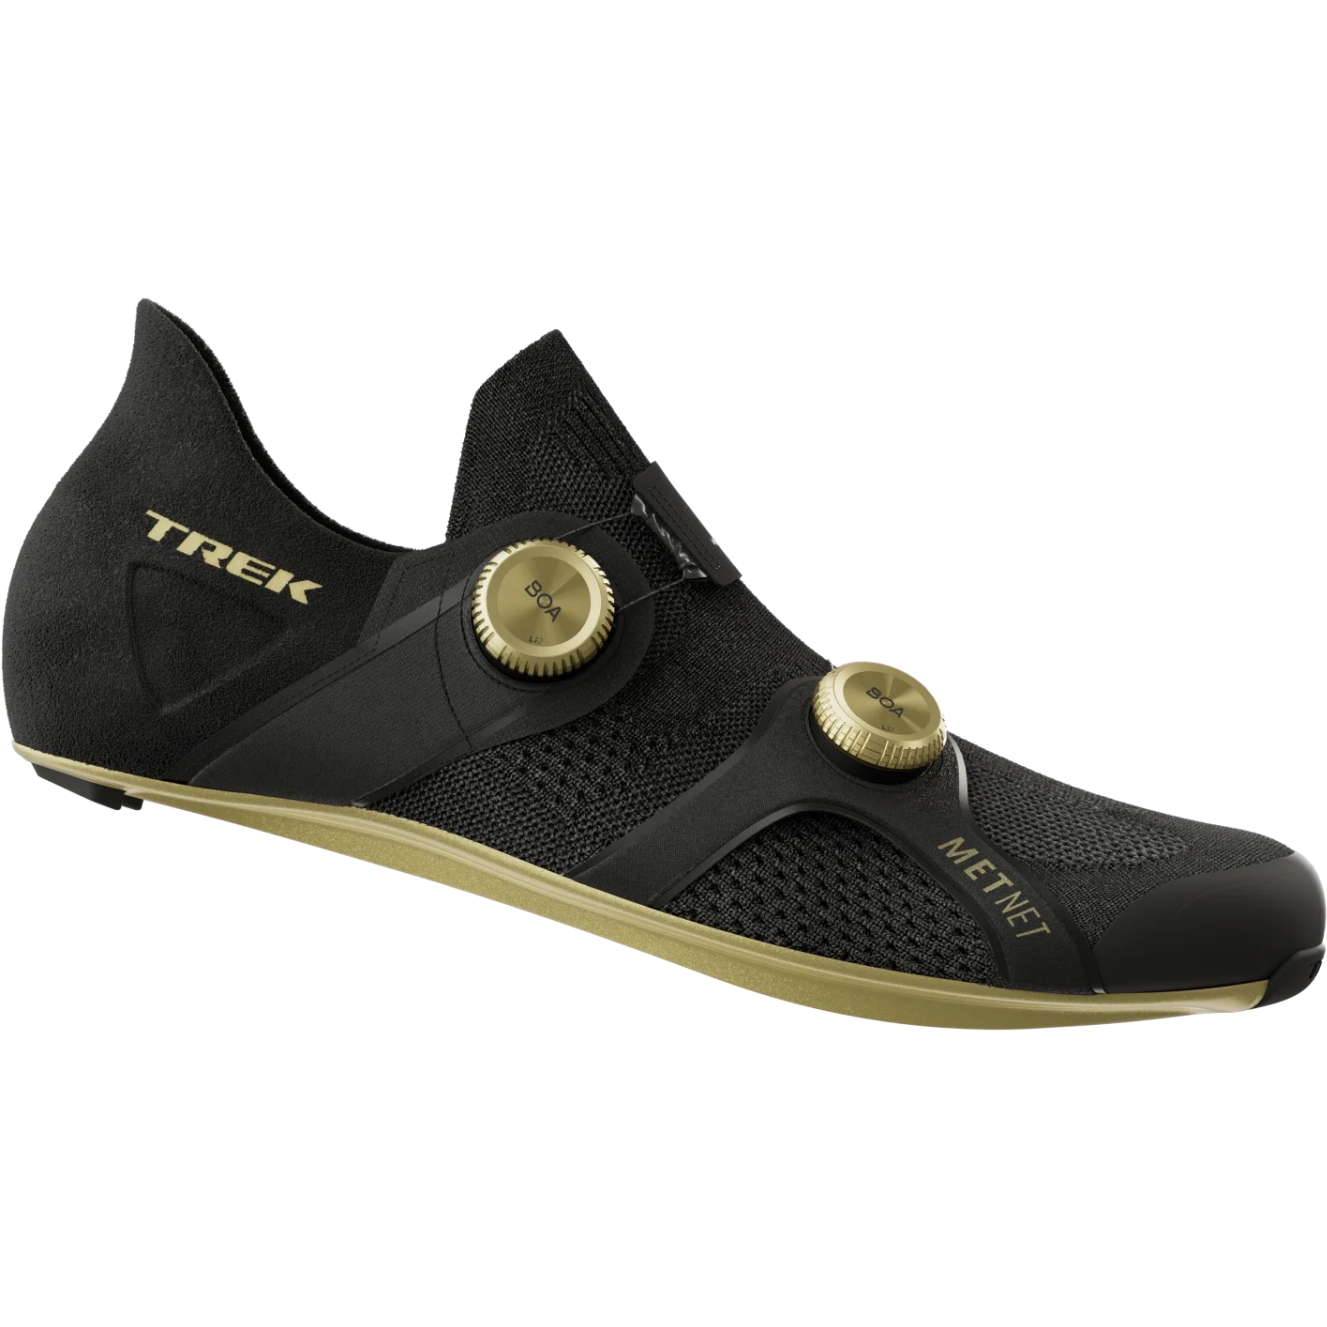 Picture of Trek RSL Knit Road Shoes - Black/Gold